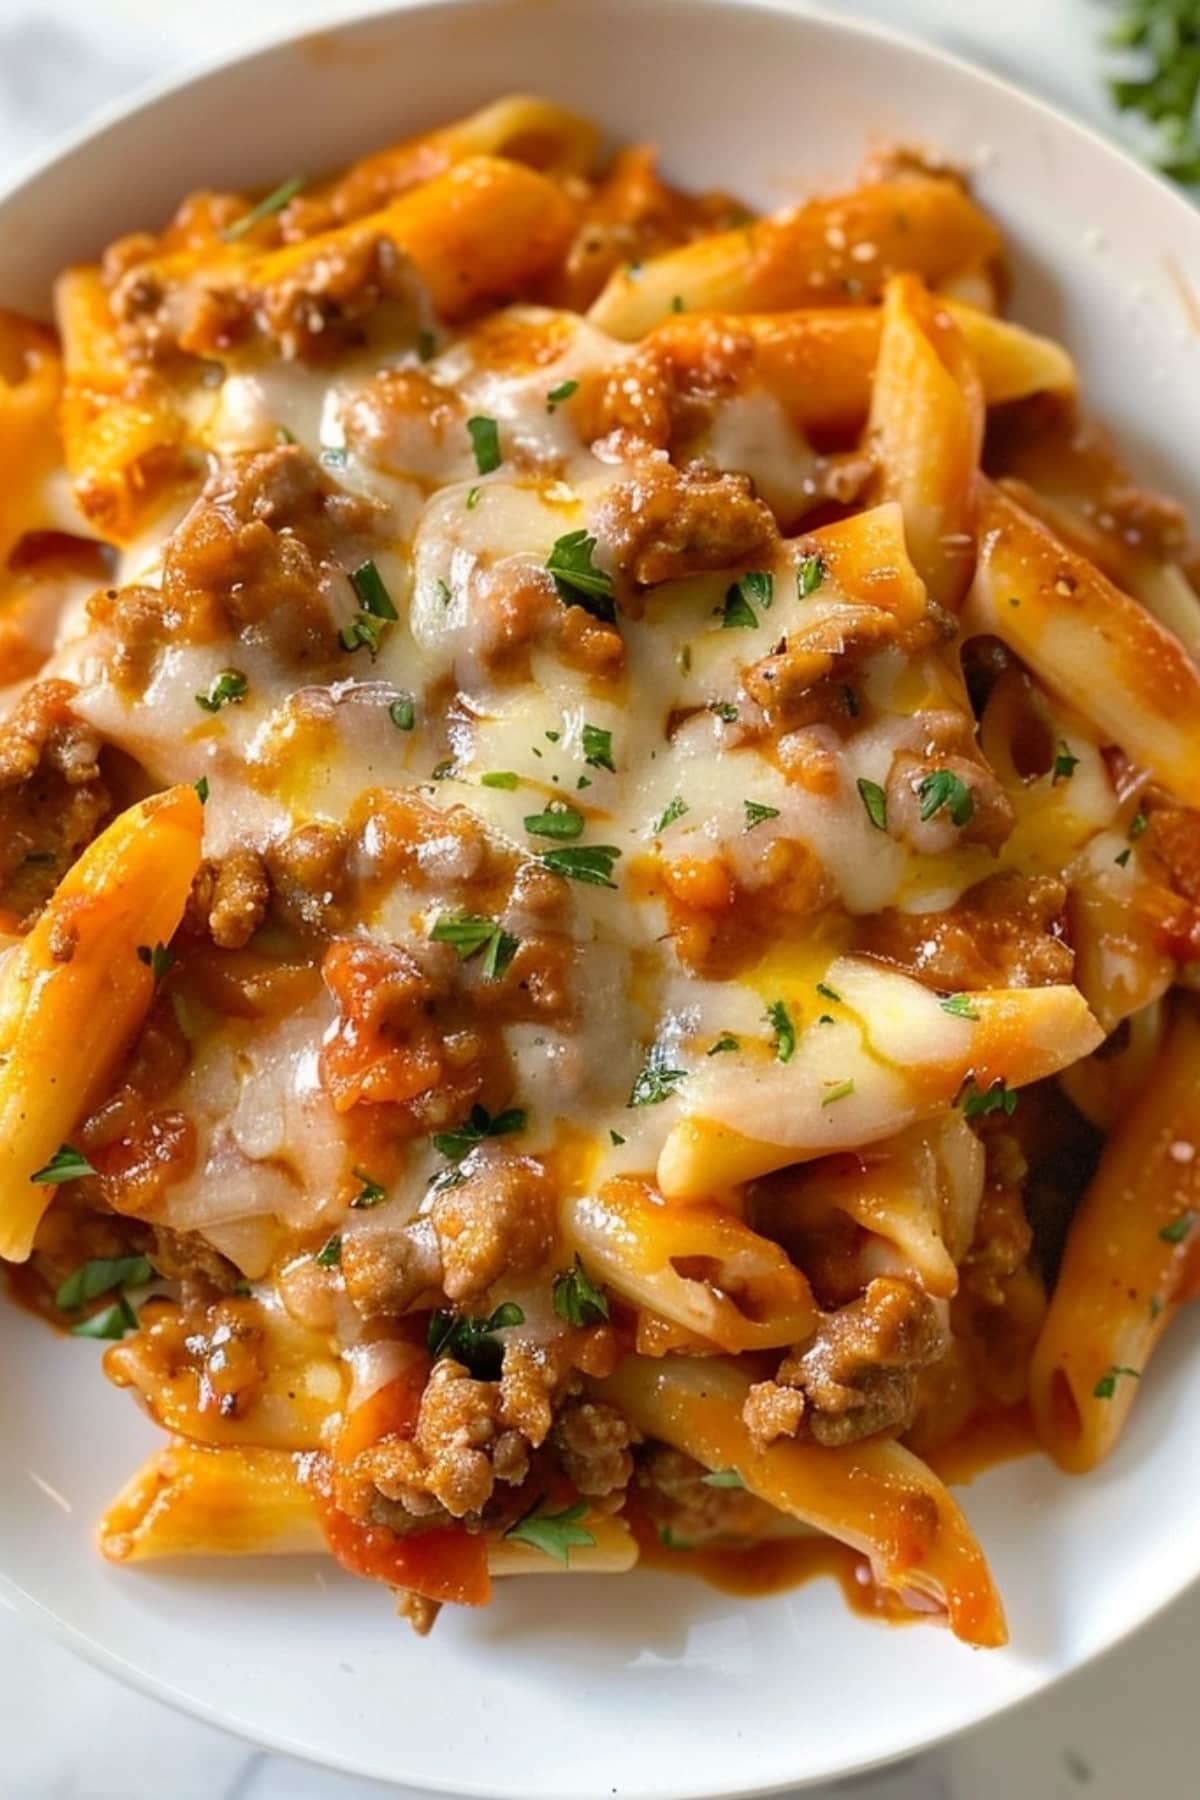 Cheesy and gooey Italian sausage pasta served on a white plate.